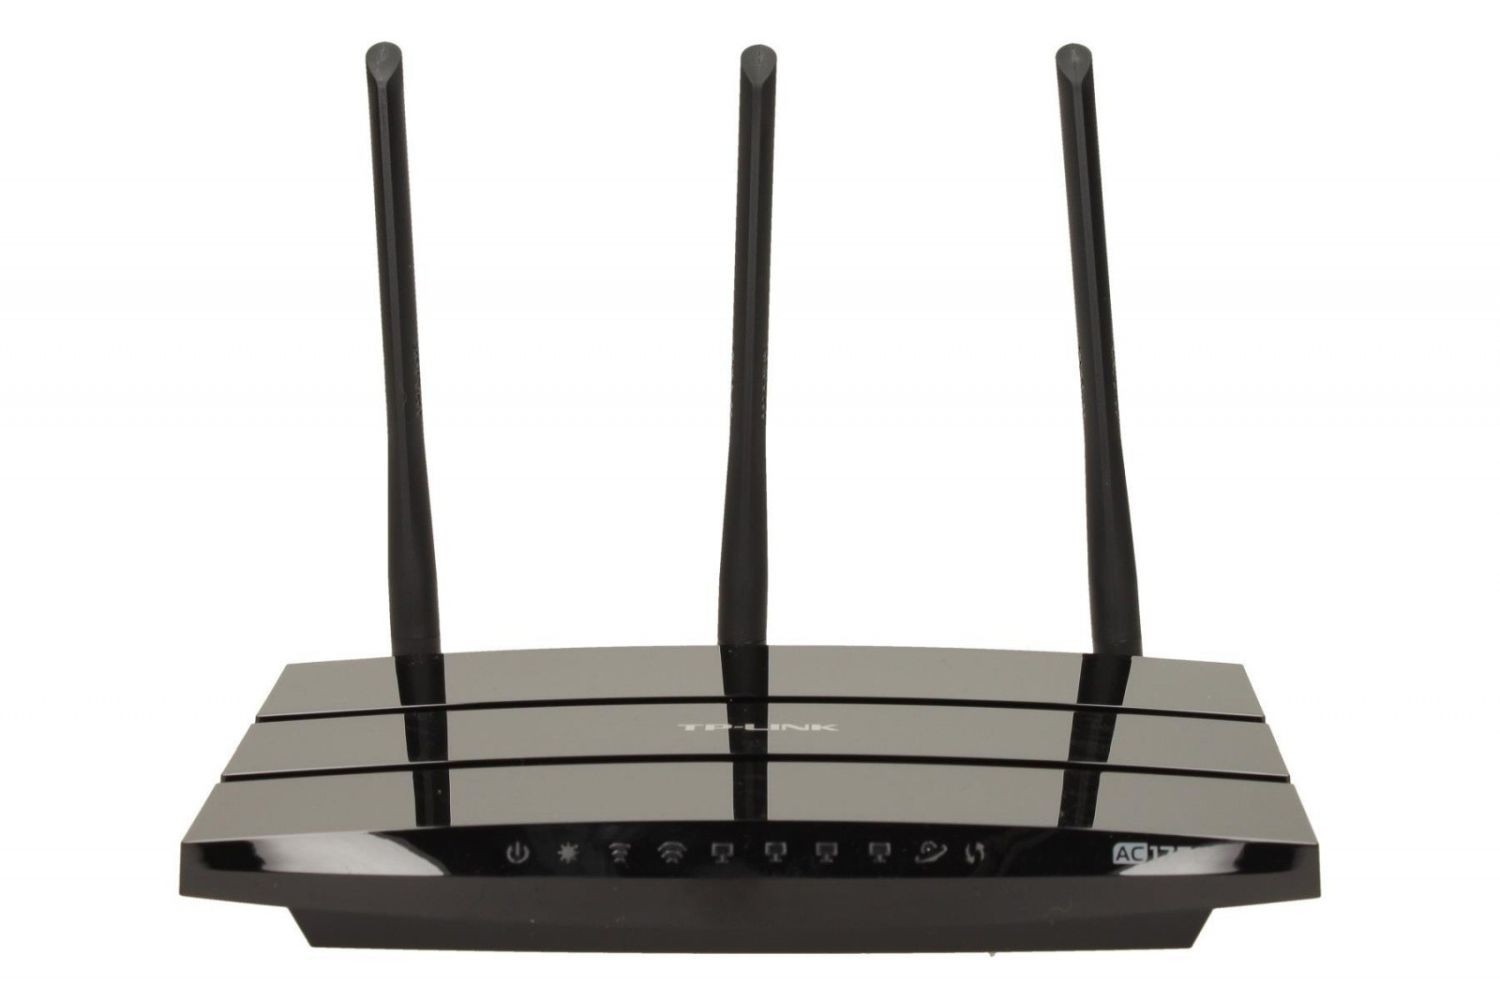 TP-Link Archer C7 router AC1750 DualBand 1WAN 4LAN-1GB 1USB